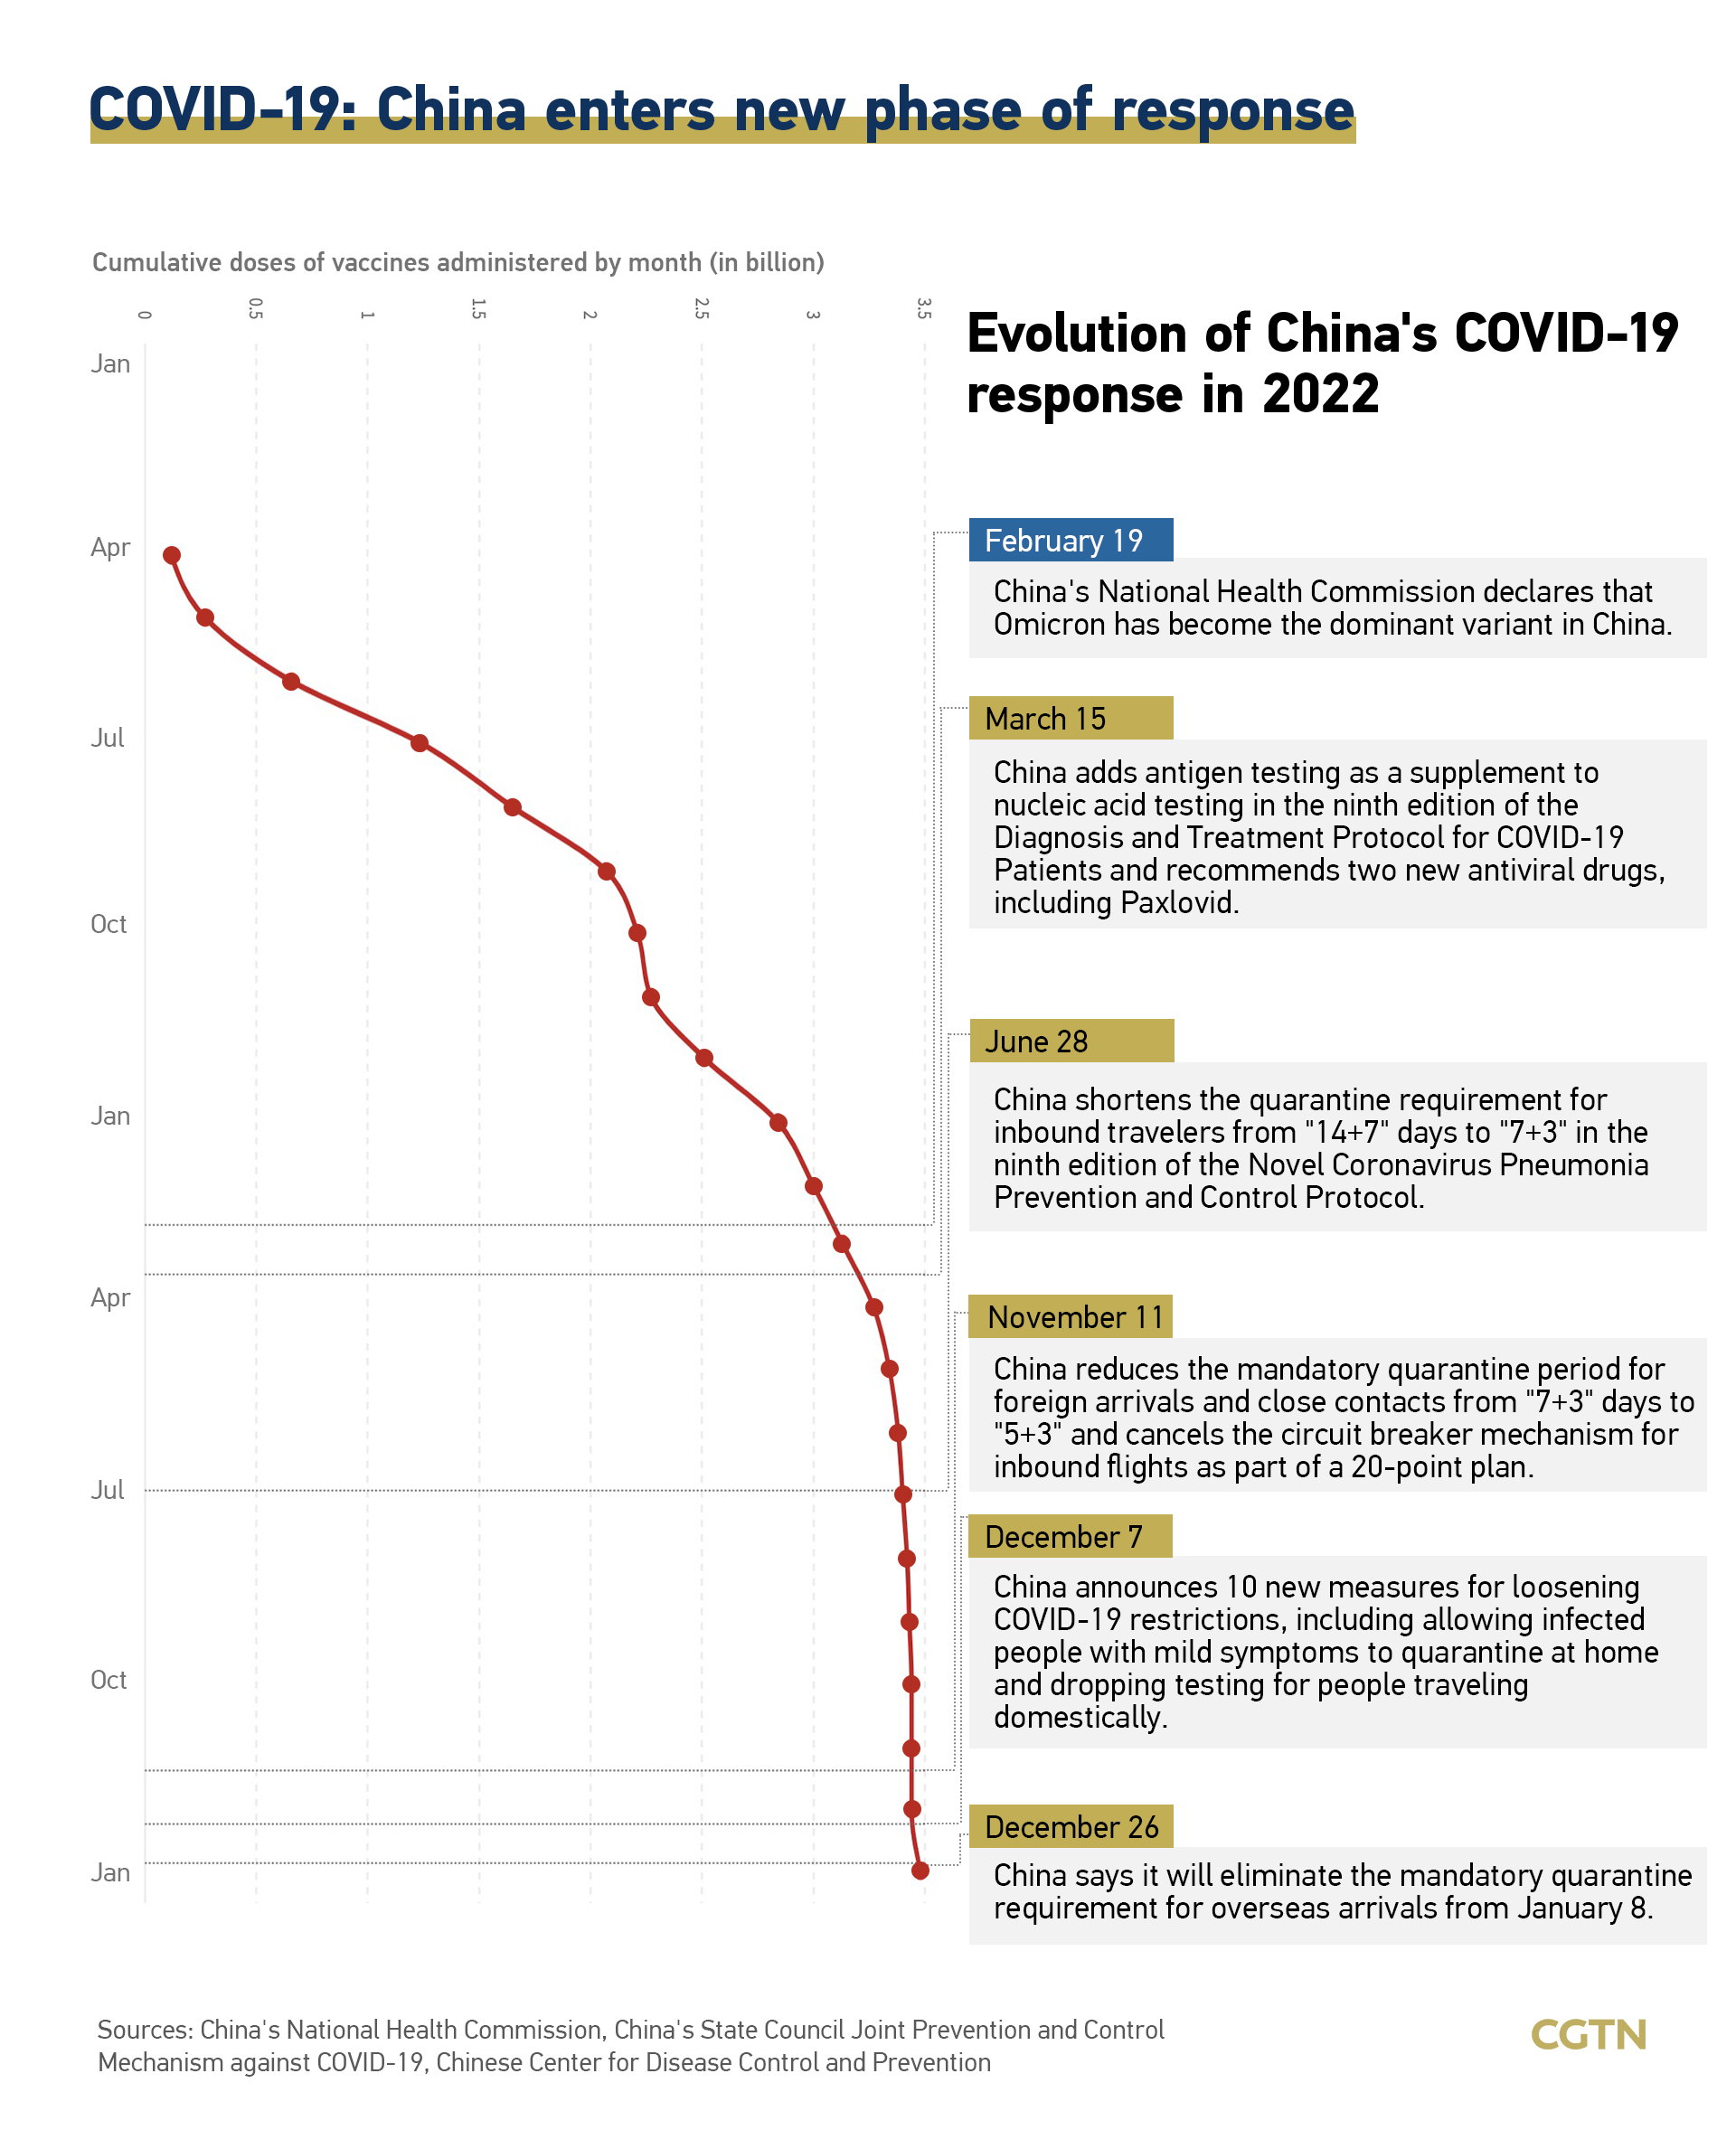 Three years on: China's COVID-19 fight in numbers